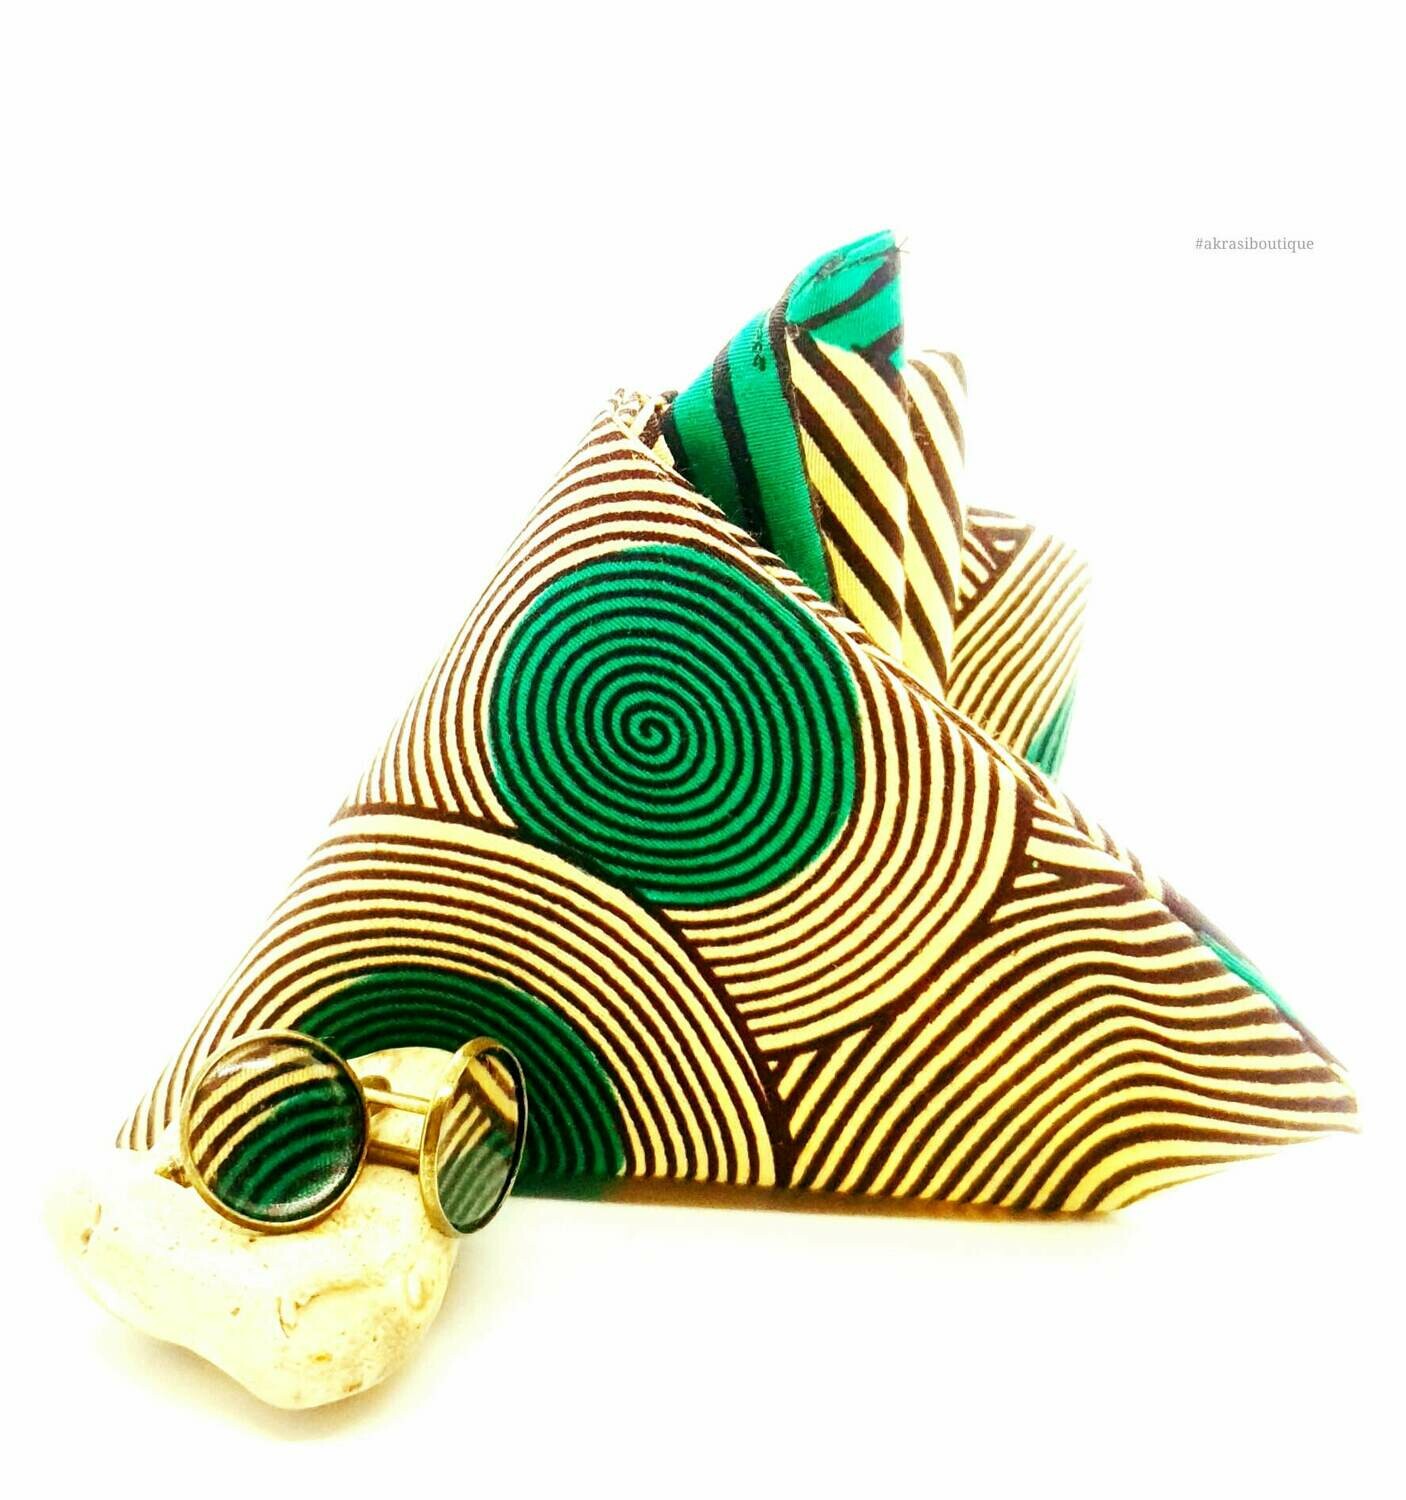 African print cream, green and brown pocket square with bronze cufflinks | men's accessories | Ankara pocket square